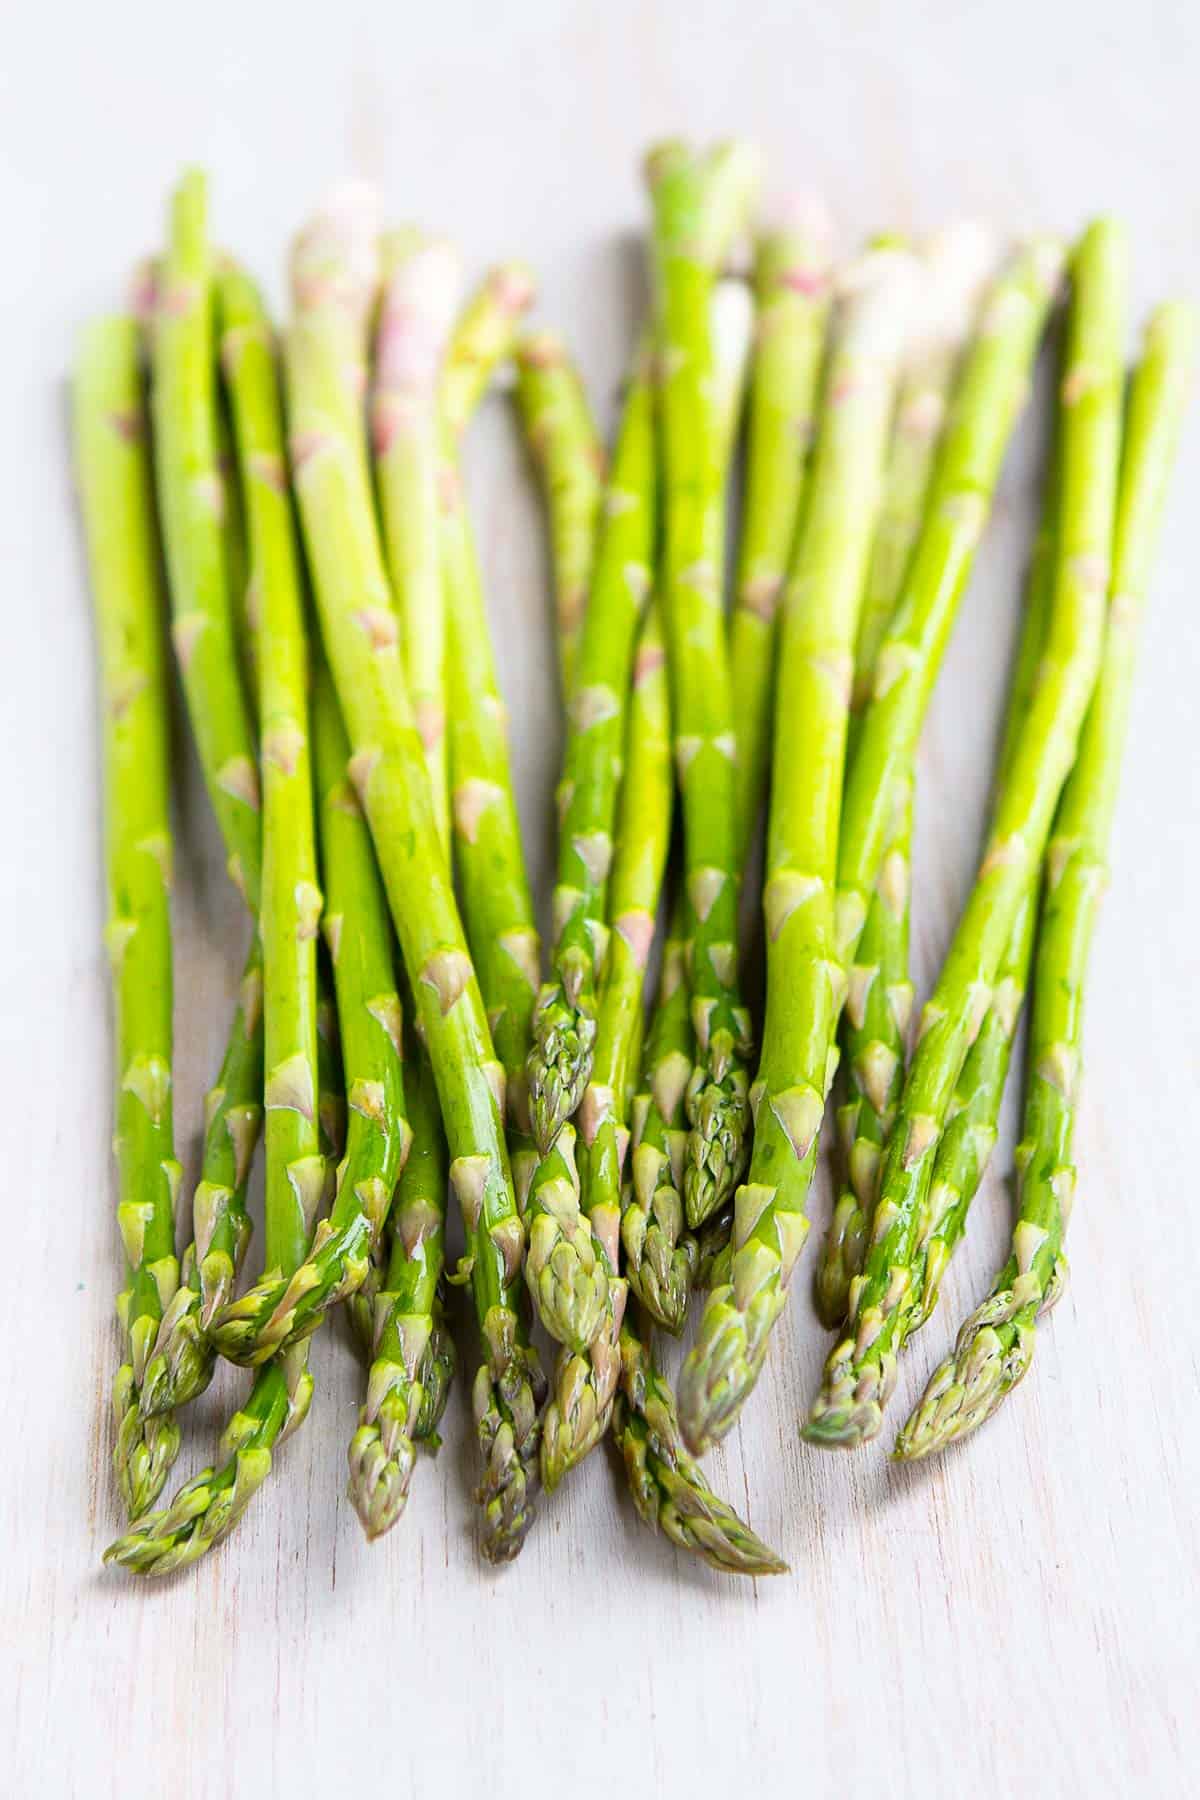 Asparagus spears on a white background.